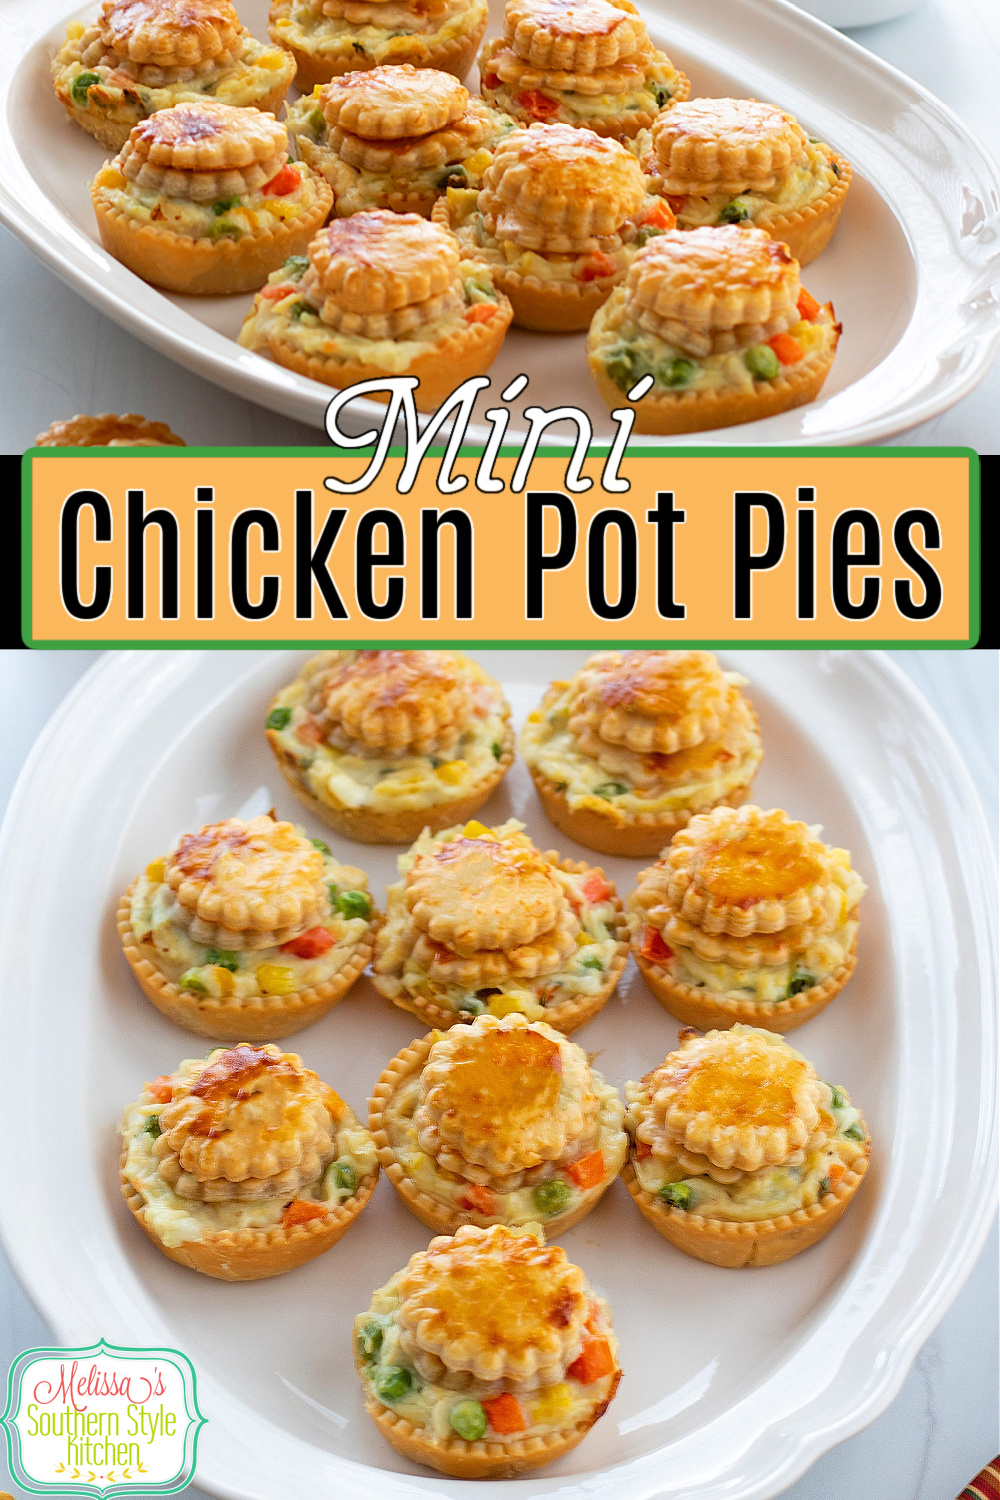 These Mini Chicken Pot Pies are perfect when you're cooking for one or two people or those times when a single serving entrée is on the menu #chickenpotpie #minipotpies #bestchickenpotpierecipe #easychickenrecipes #muffinpanrecipes #minichickenpotpies #southernchickenpotpierecipe #southernrecipes via @melissasssk